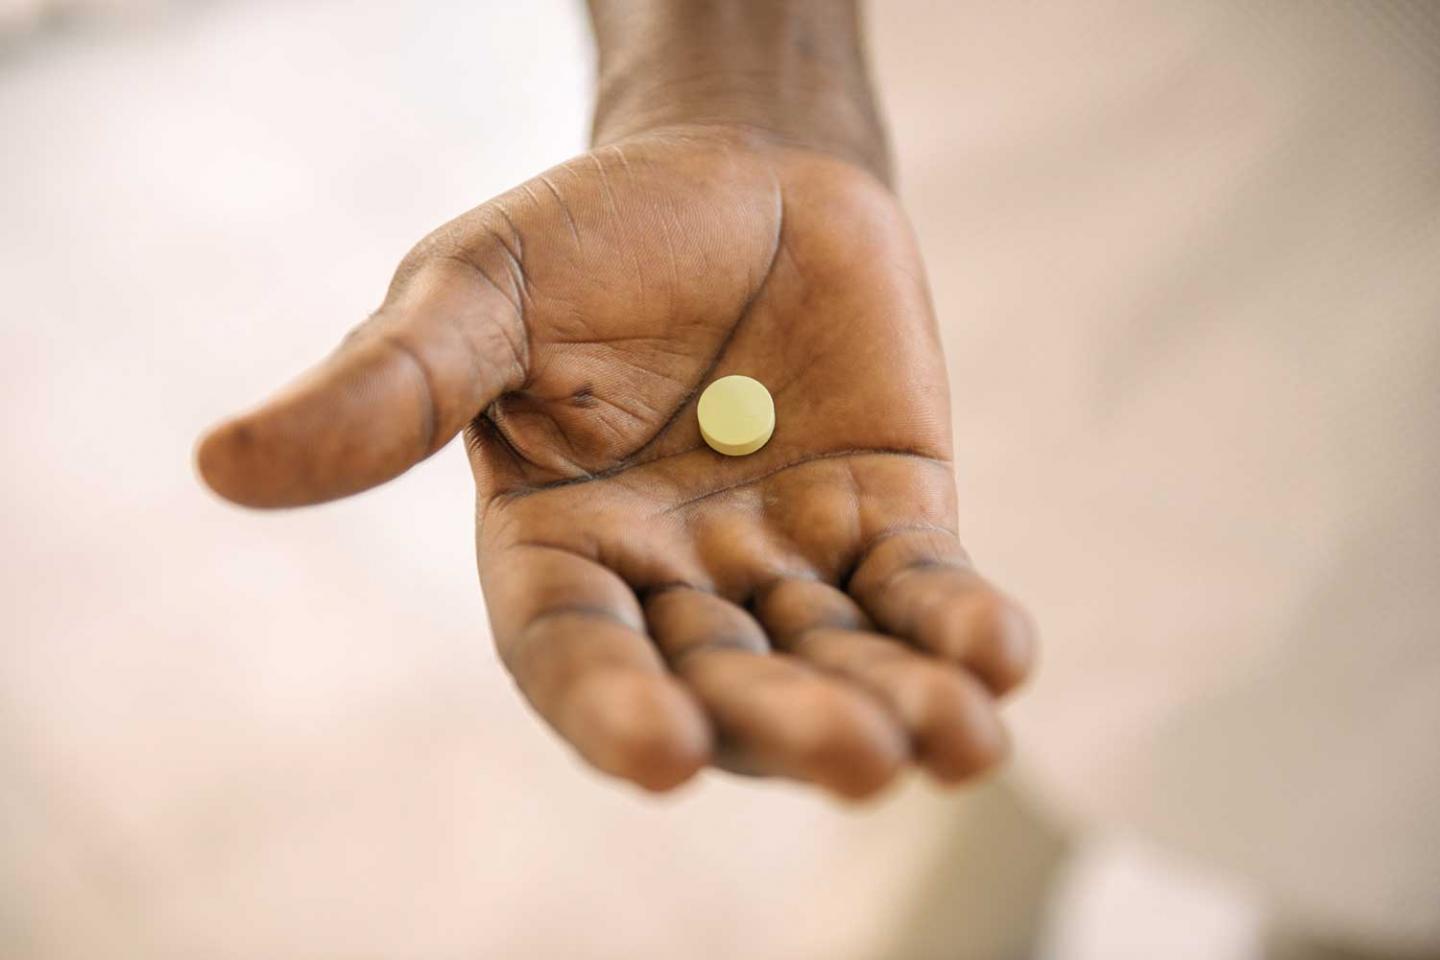 Fexinidazole, New All-Oral Treatment for Sleeping Sickness